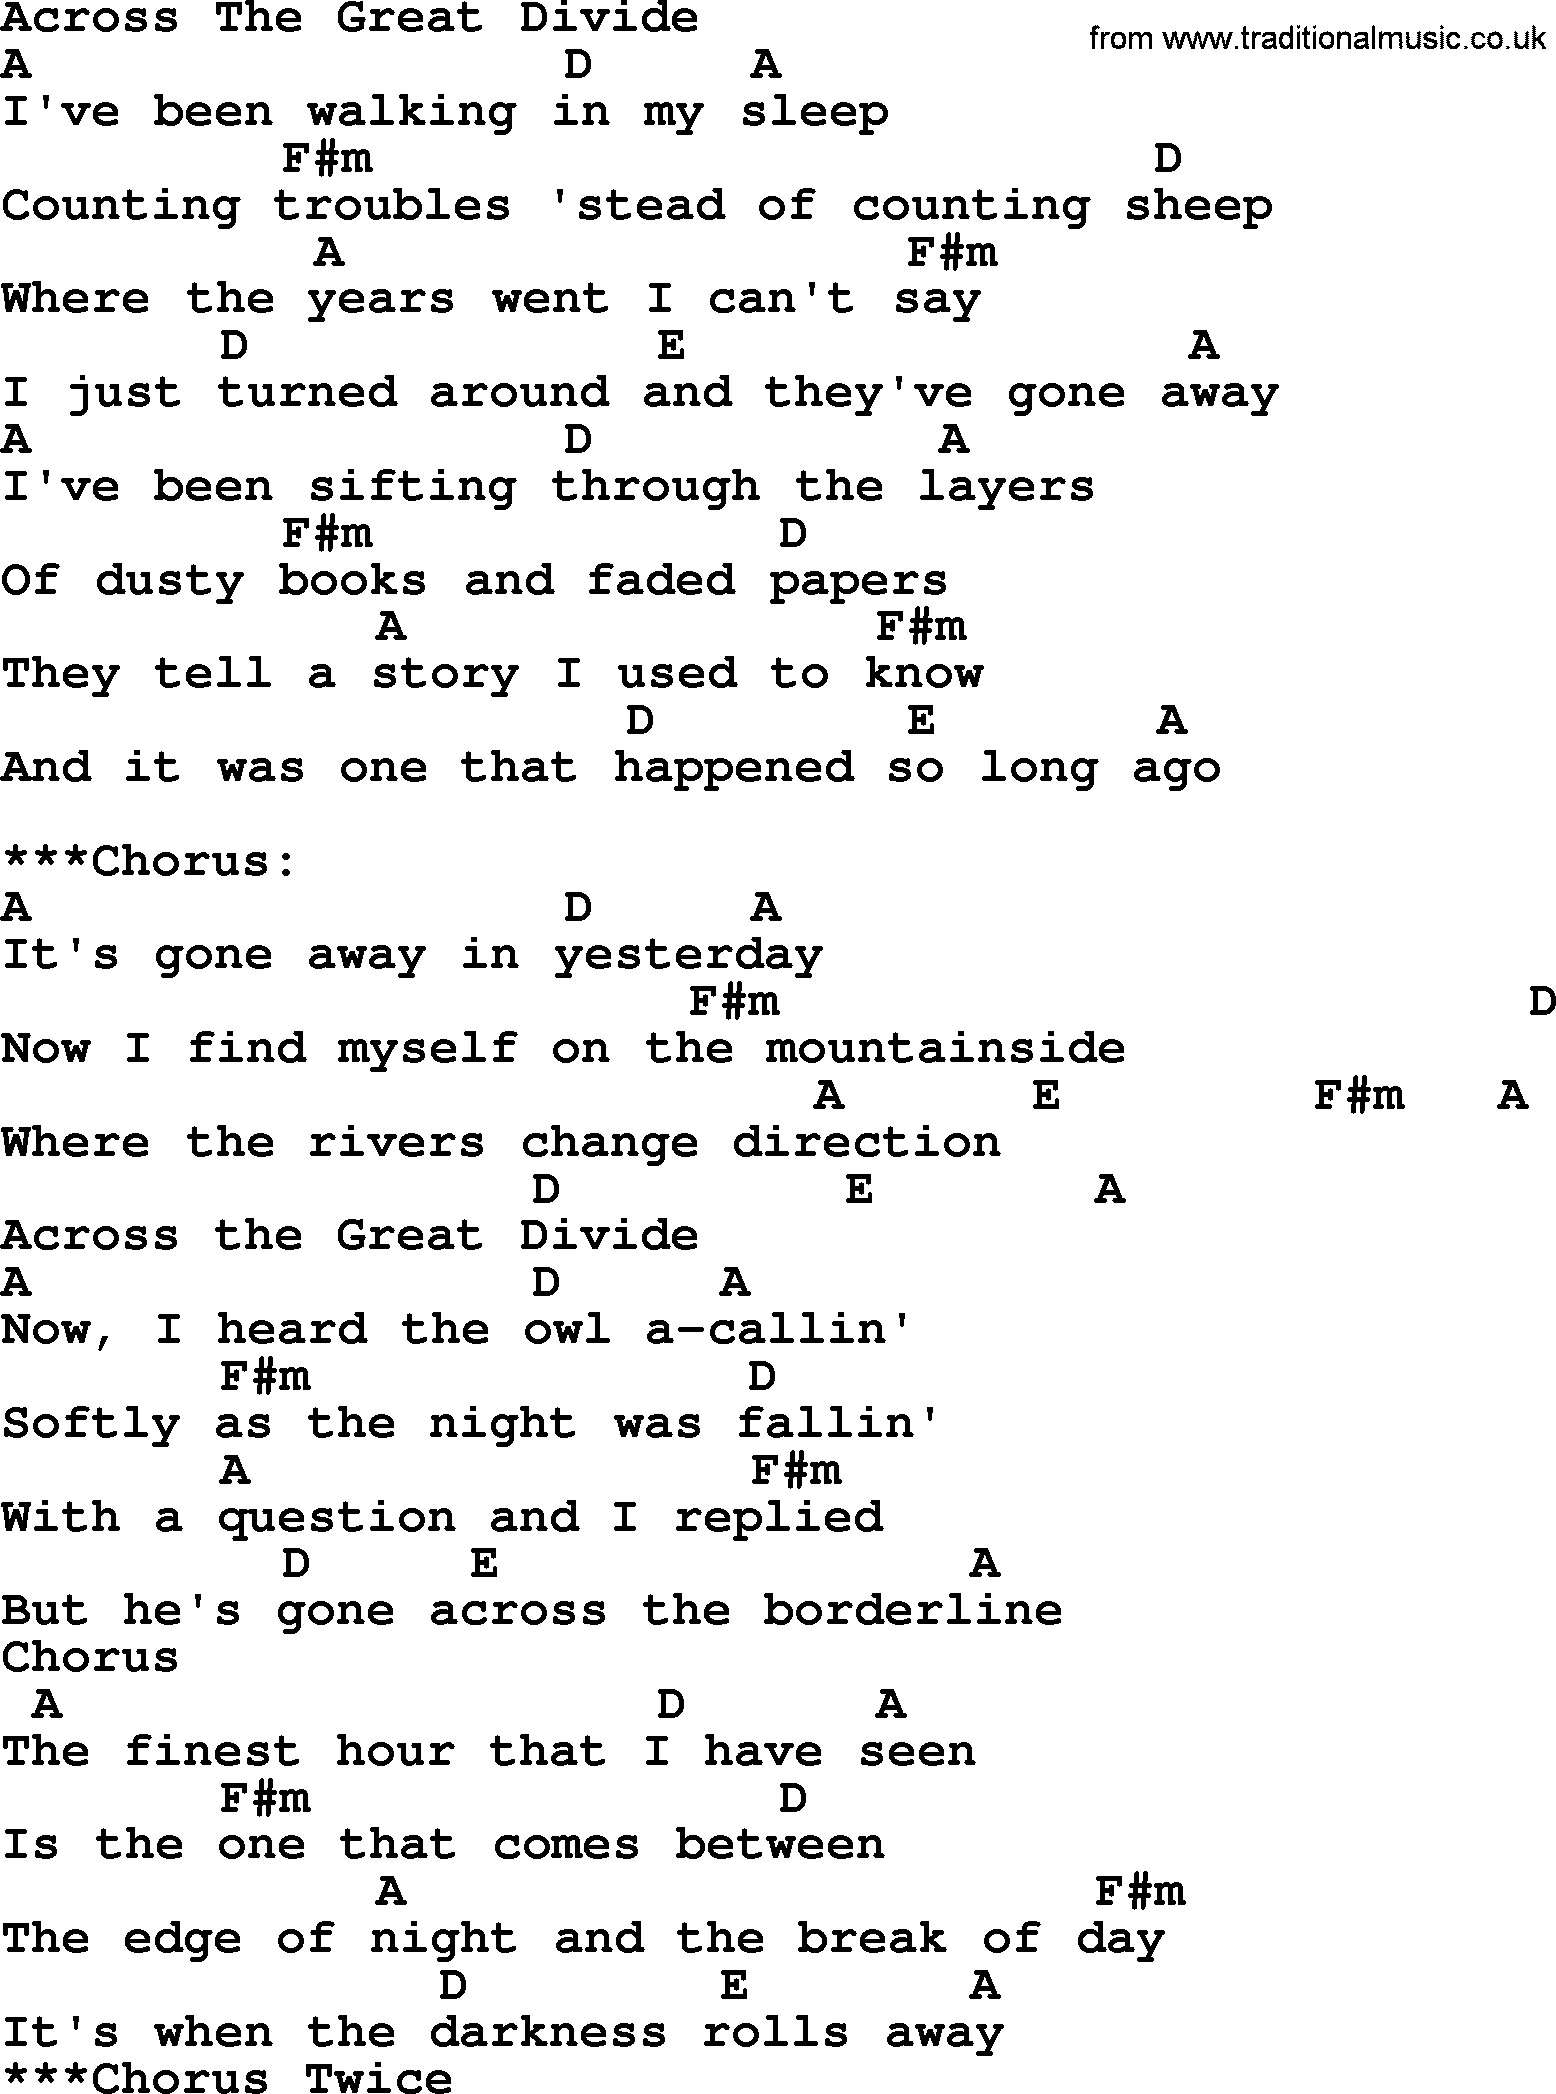 Bluegrass song: Across The Great Divide, lyrics and chords